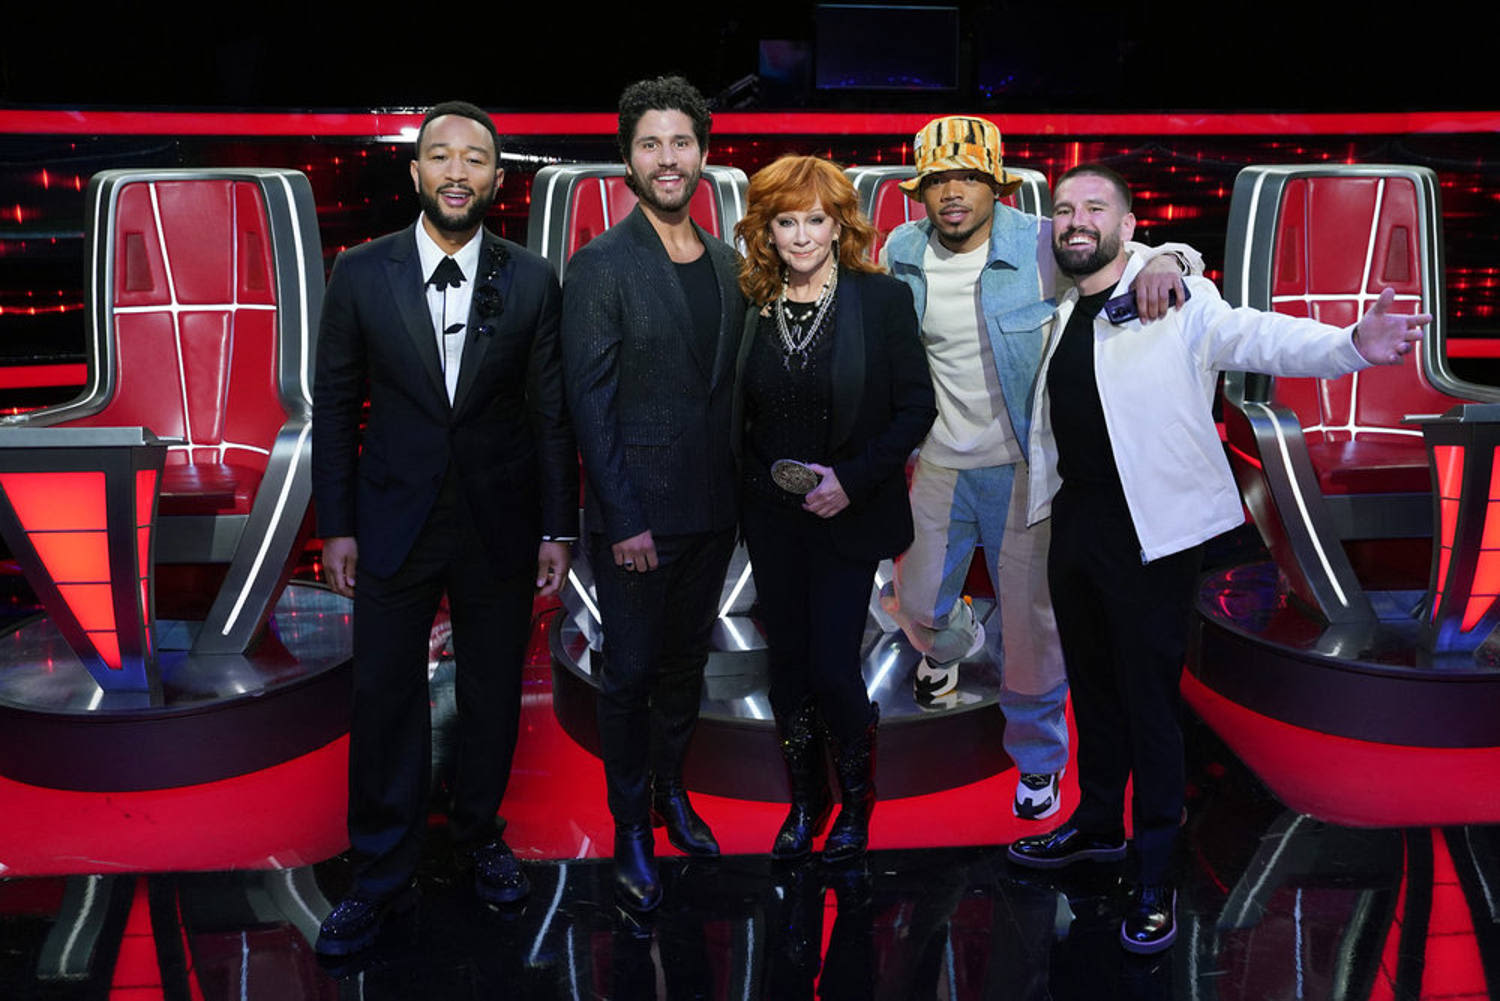 ‘The Voice’ Season 25 winner is crowned. Find out who won